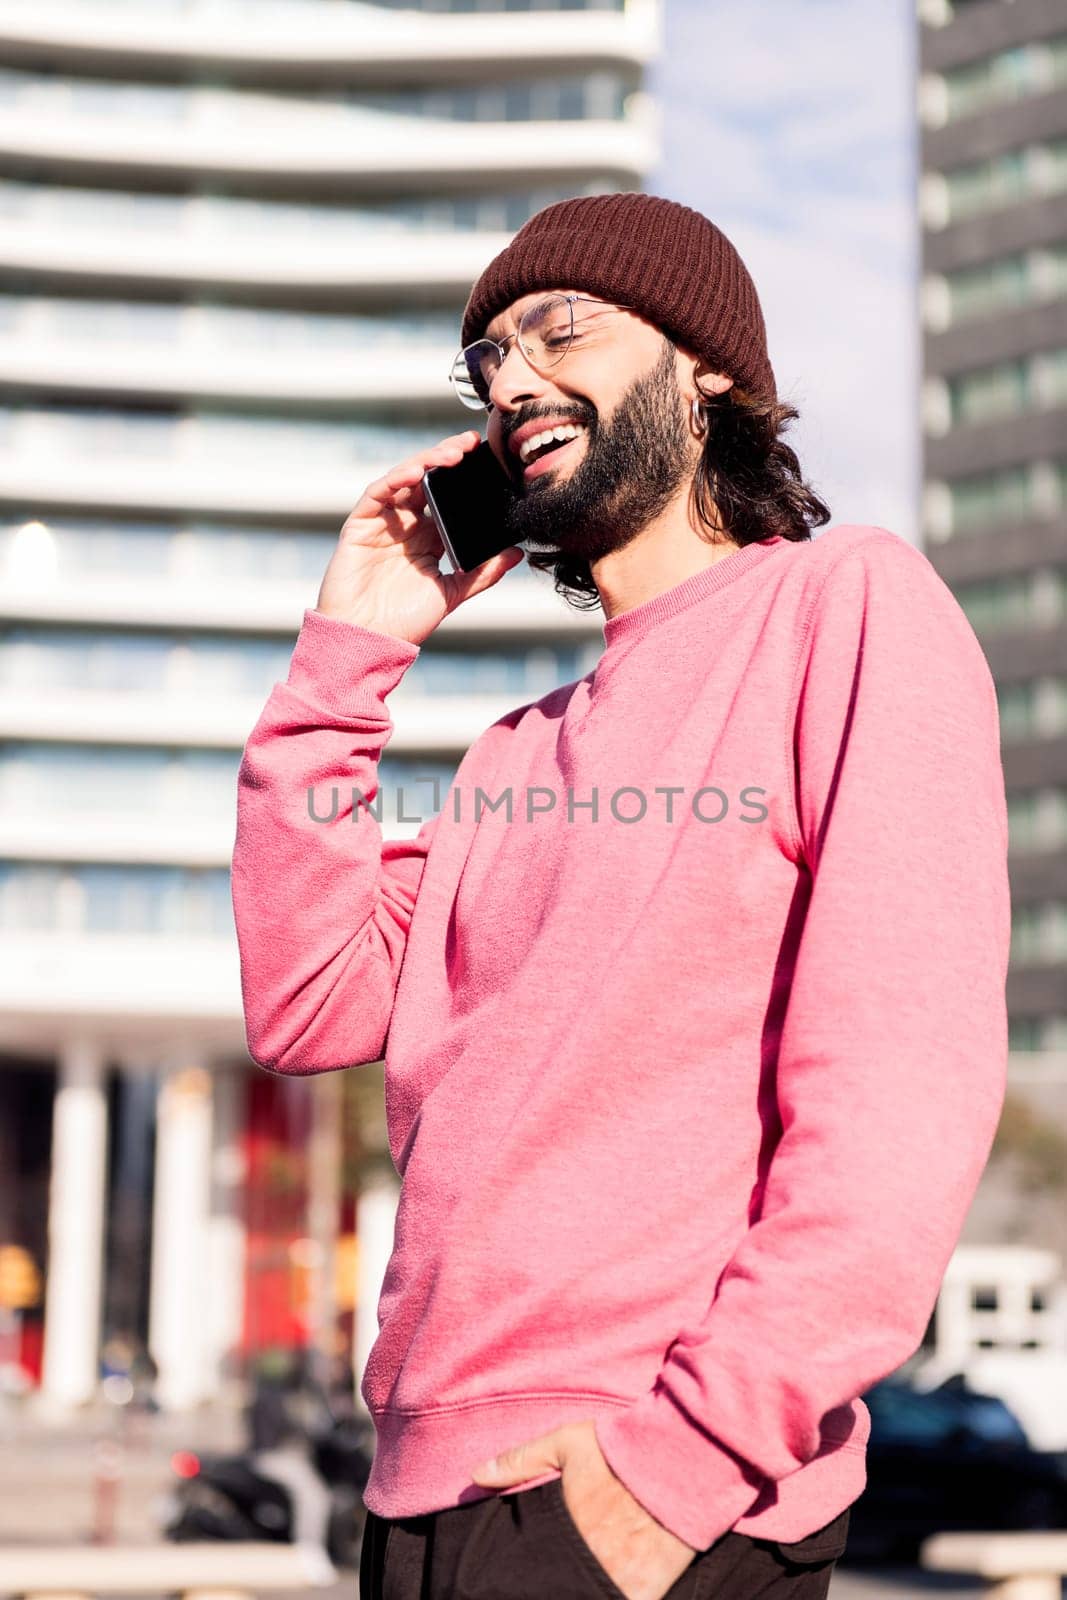 laughing young man on phone during sunny city walk by raulmelldo